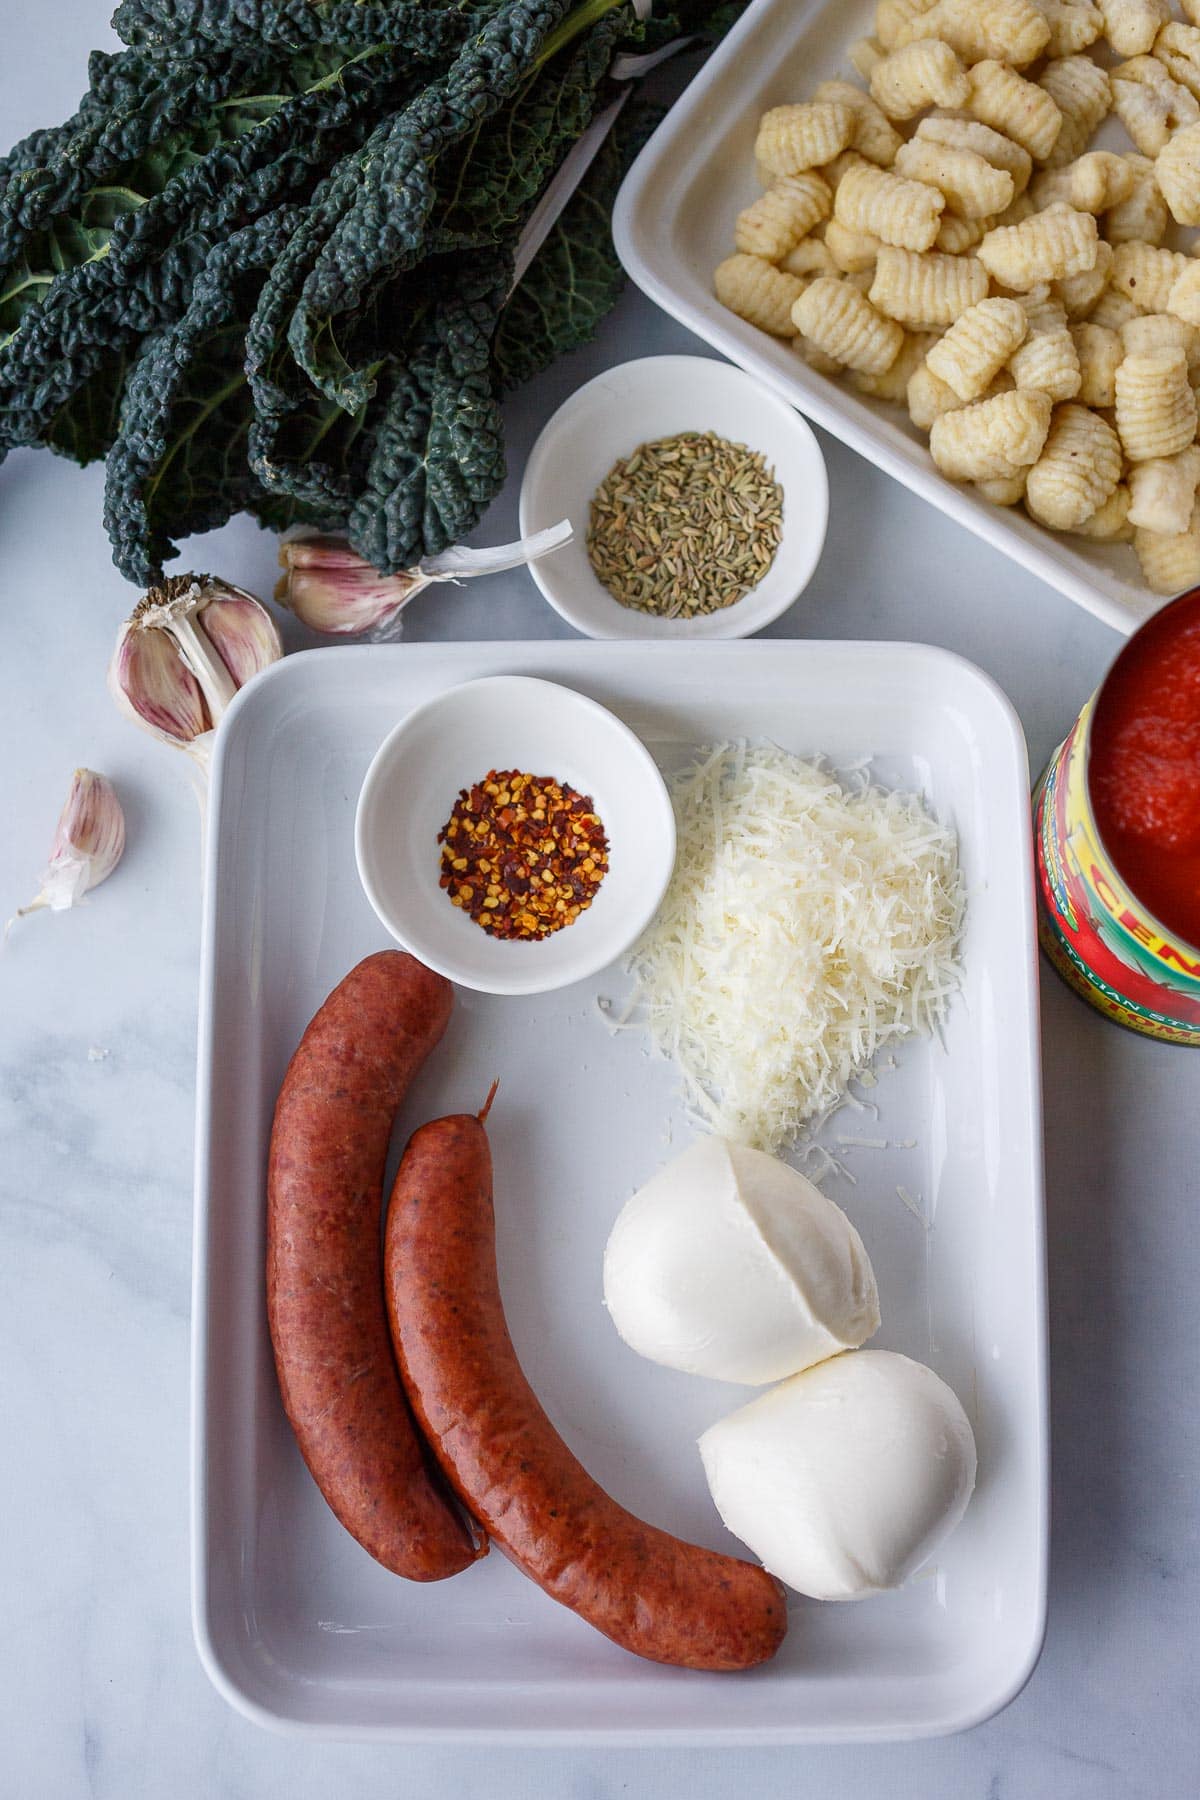 Ingredients in Baked Gnocchi.